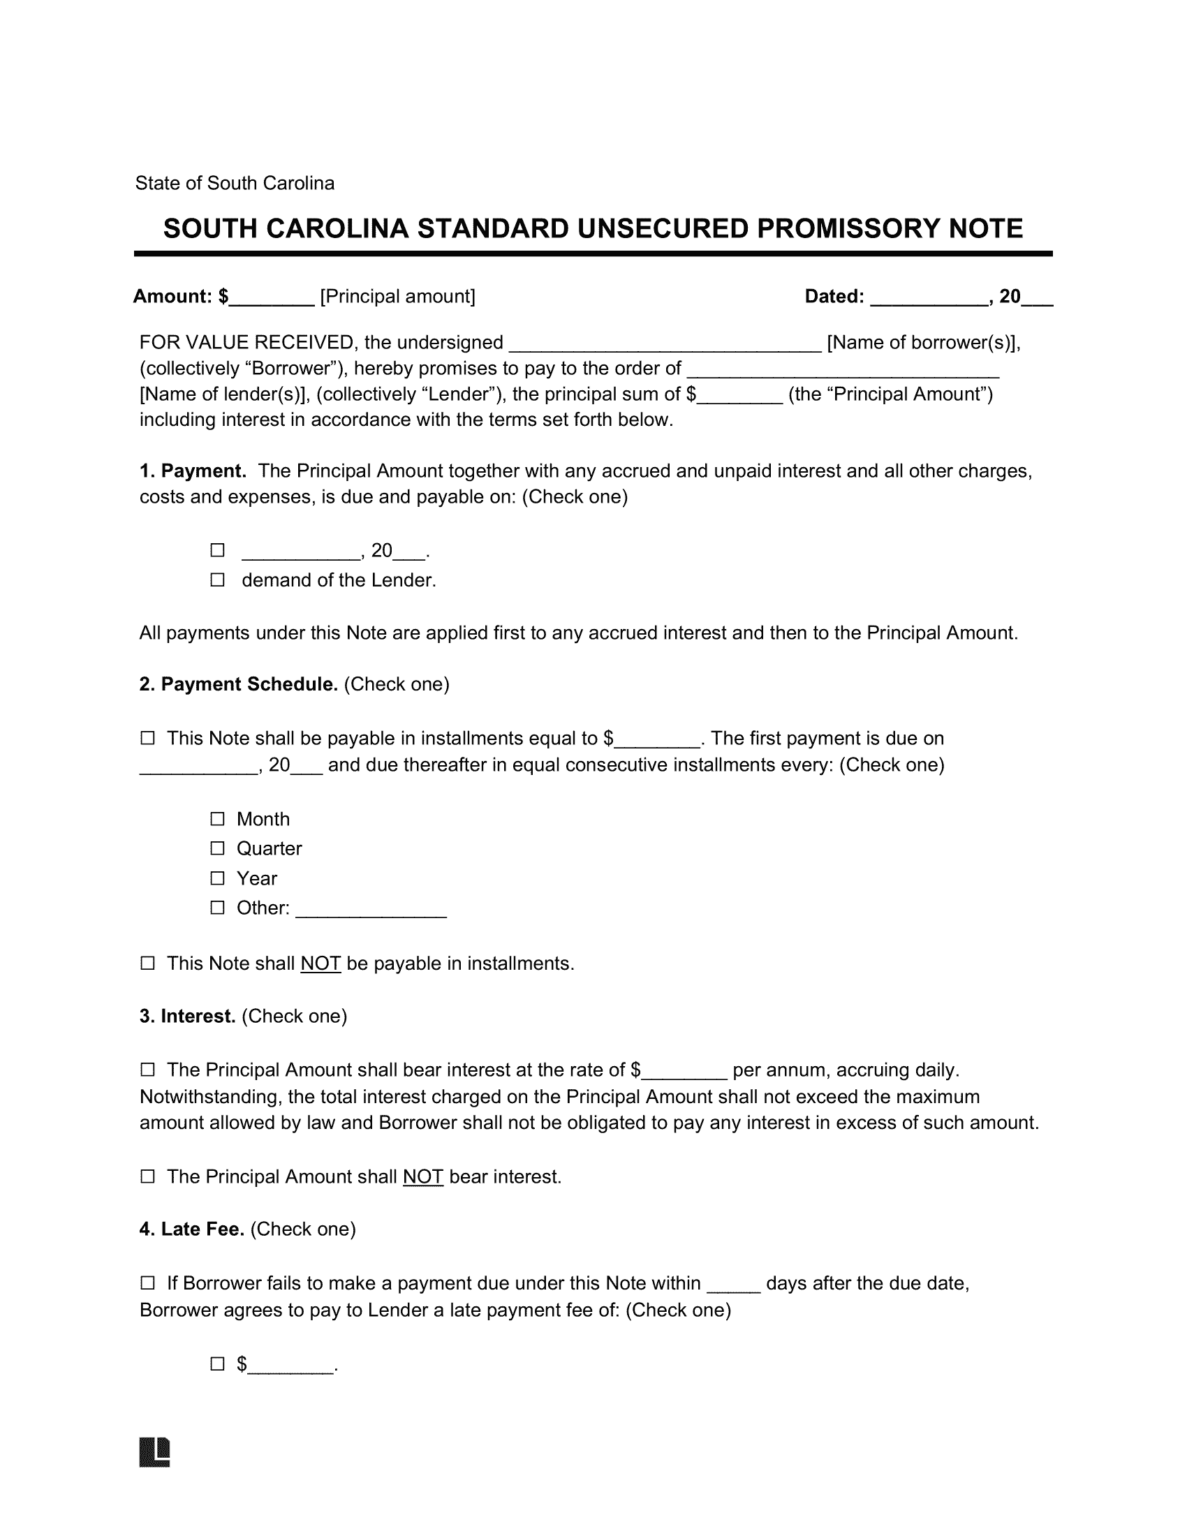 free-south-carolina-unsecured-promissory-note-template-pdf-word